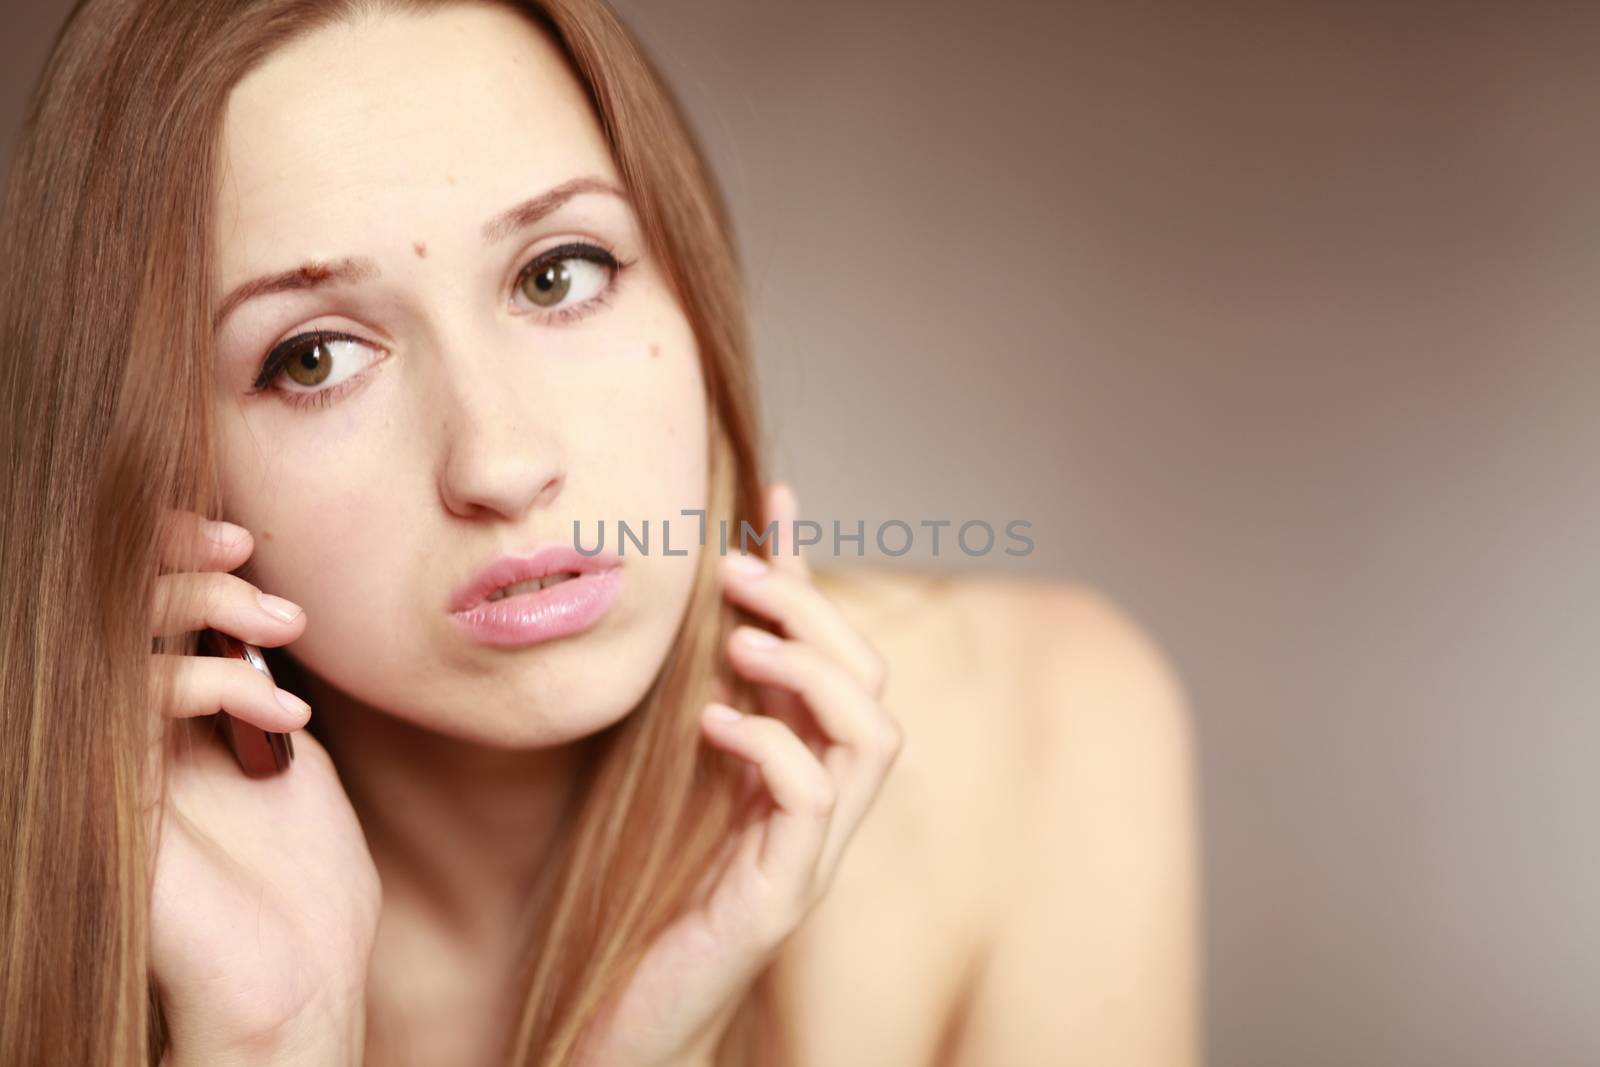 The beautiful girl is talking on the mobile phone. Girl portrait. Woman portrait.